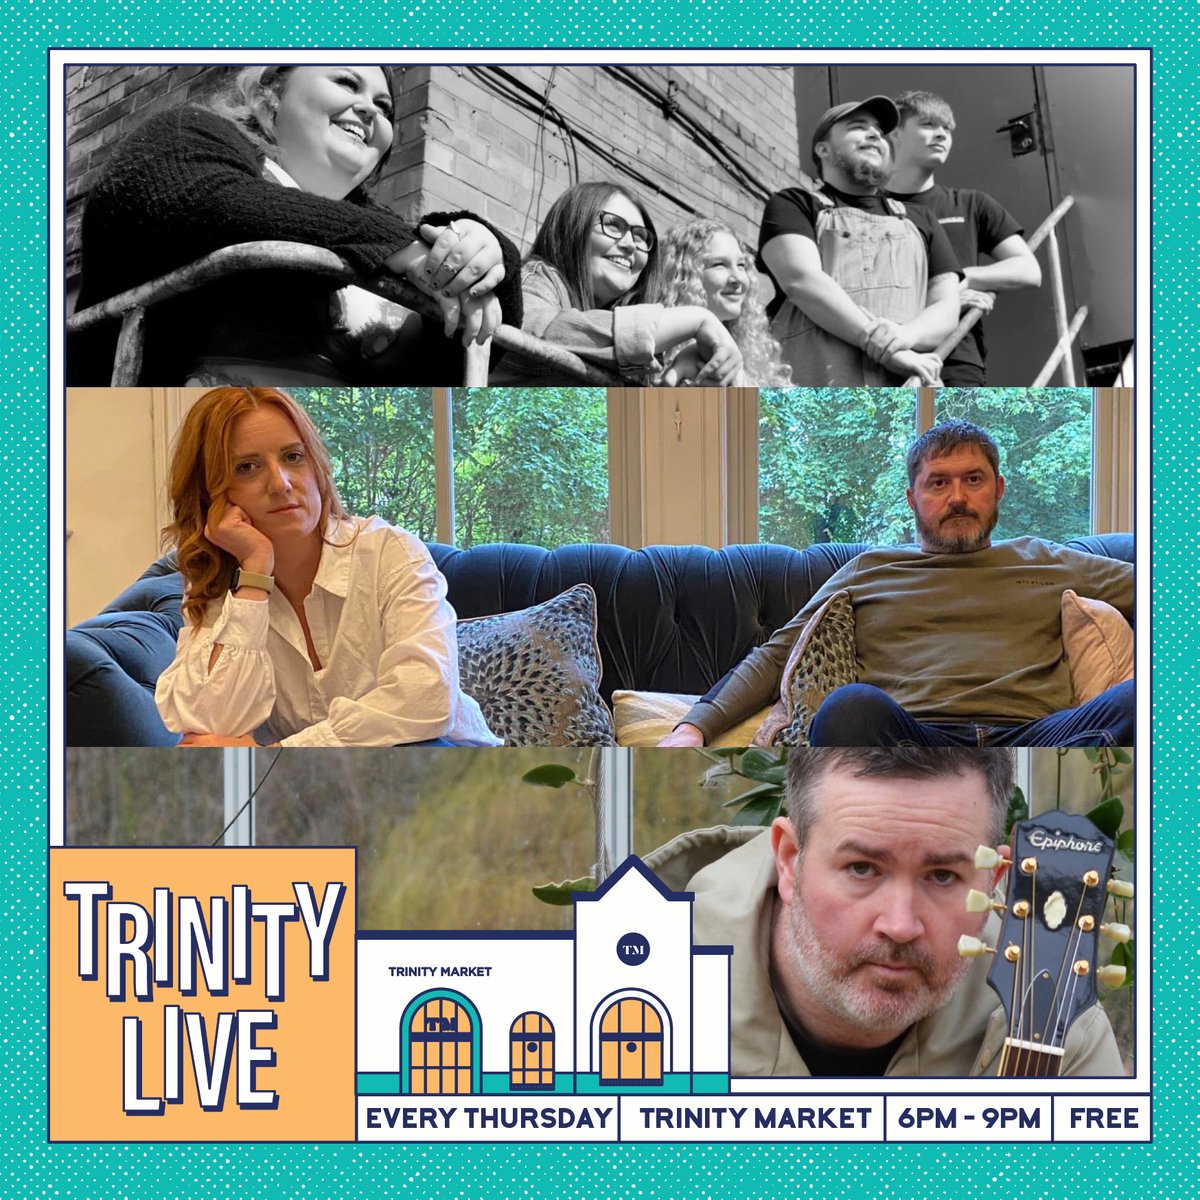 TONIGHT @TrinityMarket1: 1️⃣ All Gone South: 8:15pm Hull 5-piece Indie Pop band with funk&soul-inspired hooks 2️⃣ @ontherise83: 7:30pm Music full of emotion, connection and a walk through life’s twists and turns 3️⃣ @mattcrossland12: 6:45pm Acoustic singer-songwriter from Hessle